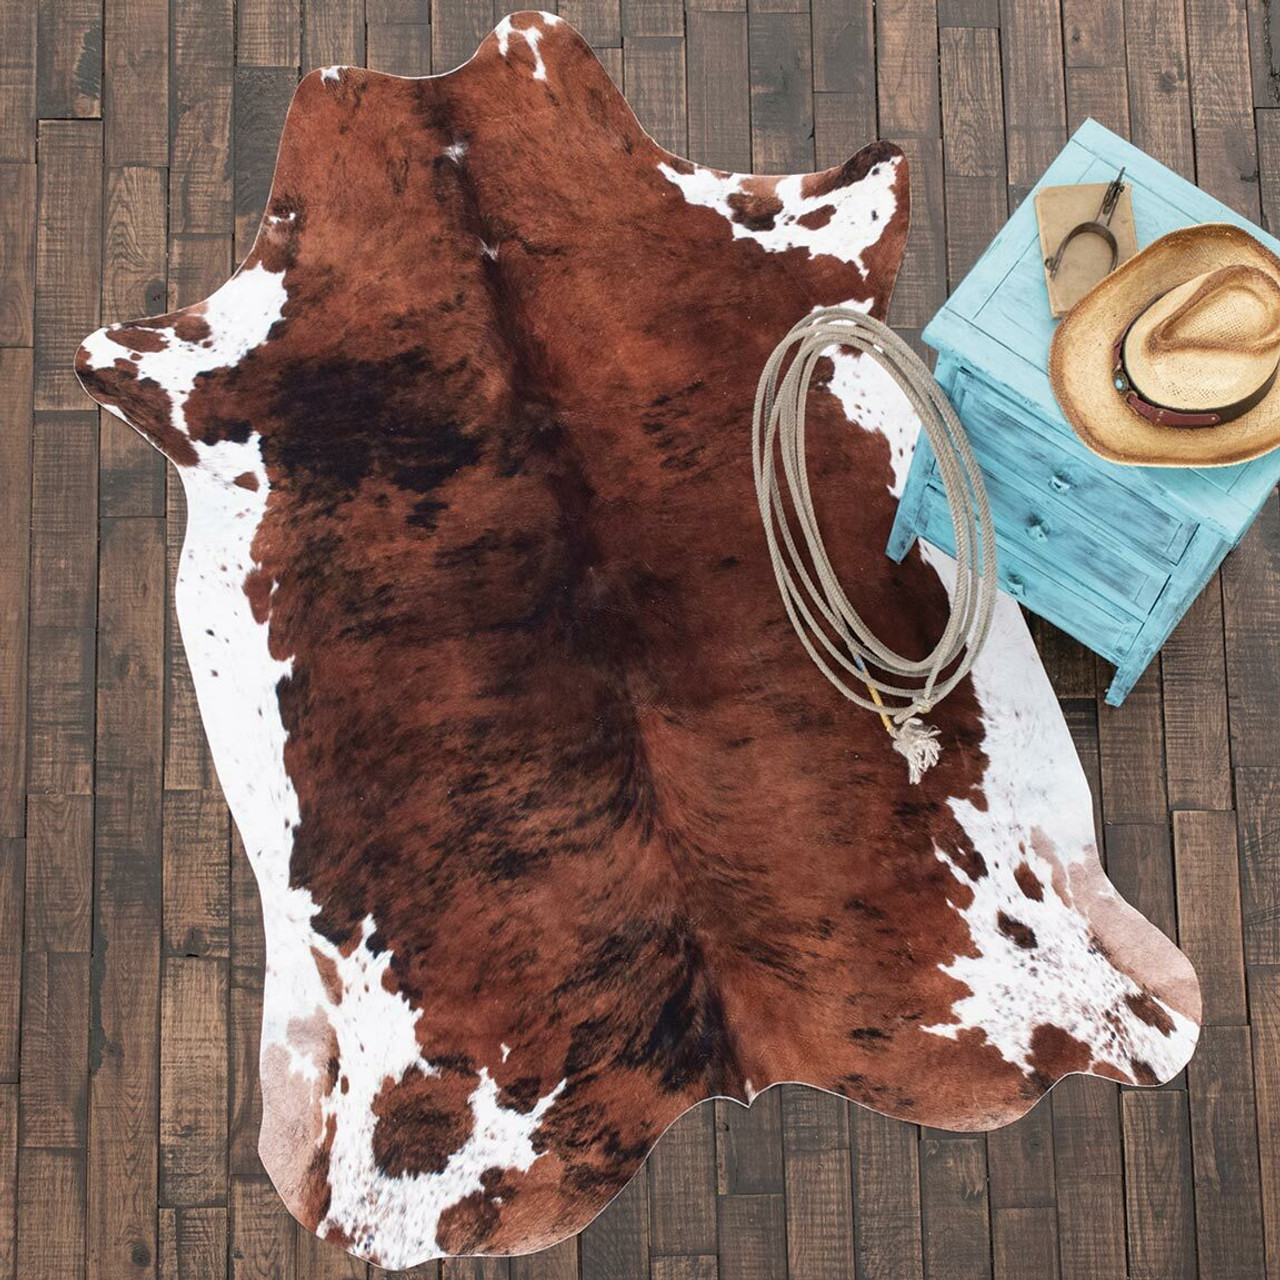 Faux Cowhide Brown Natural Pillow Cover